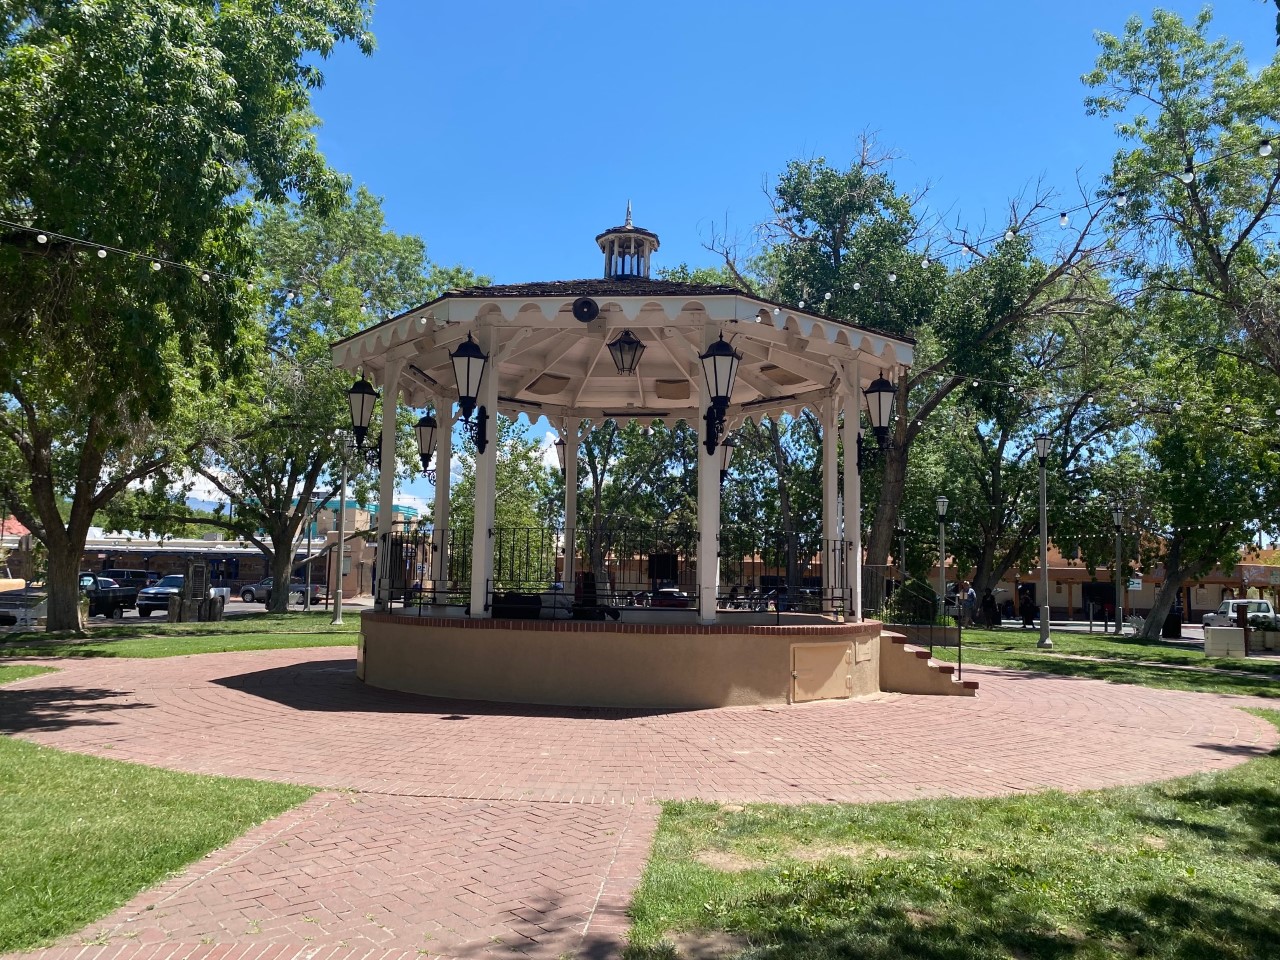 Gazebo in town square in Old Town (We enjoyed seeing trees in this desert area.)